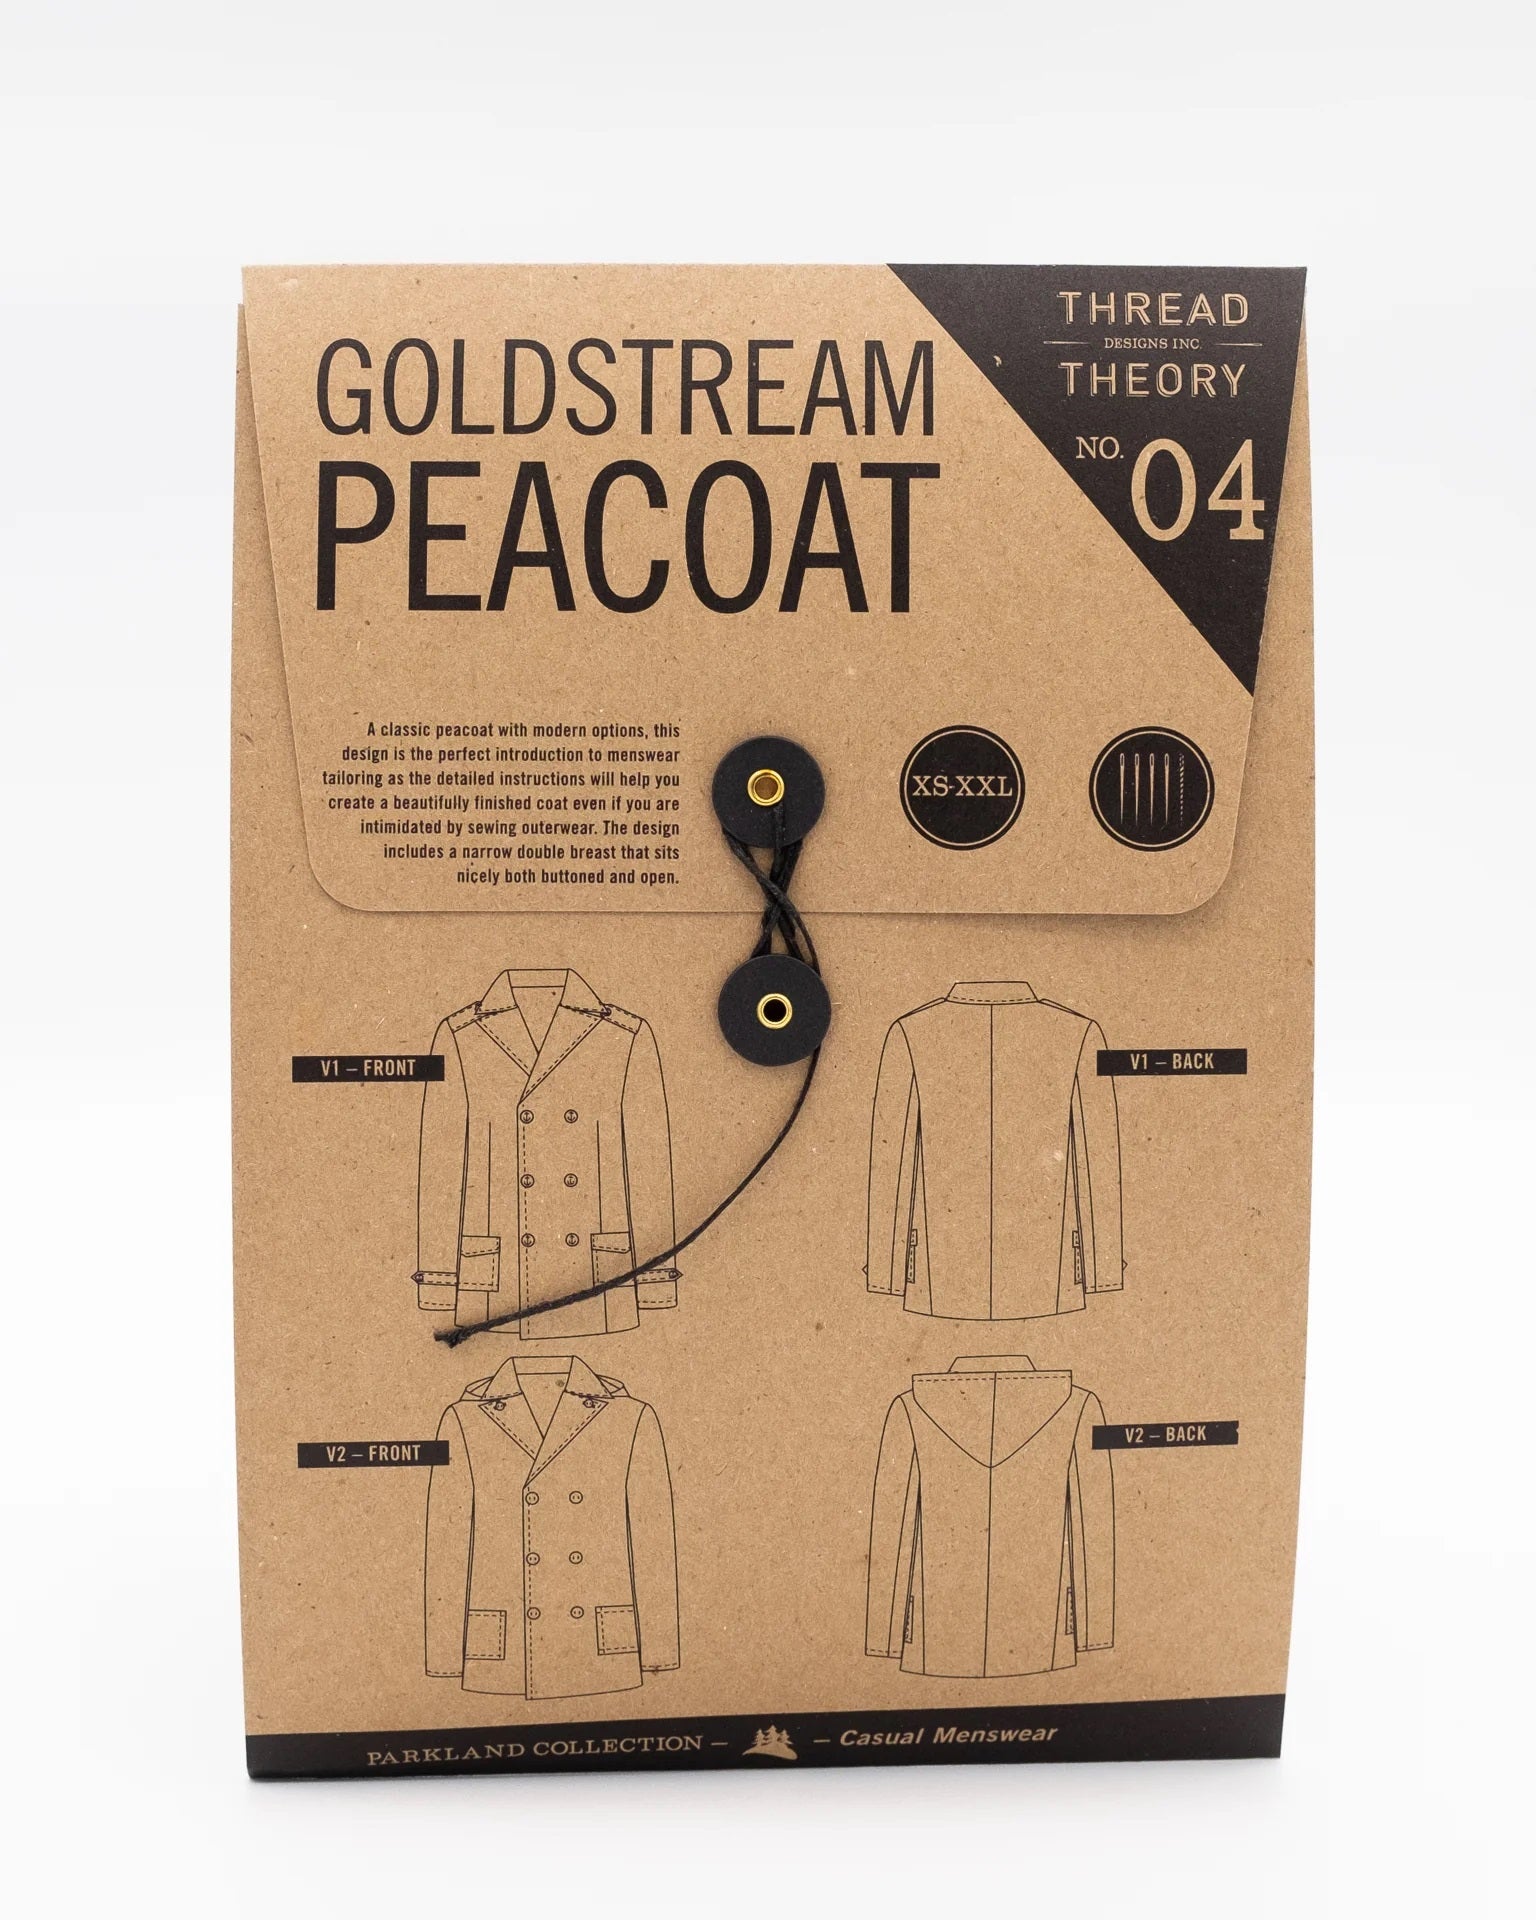 Goldstream Peacoat Pattern by Thread Theory